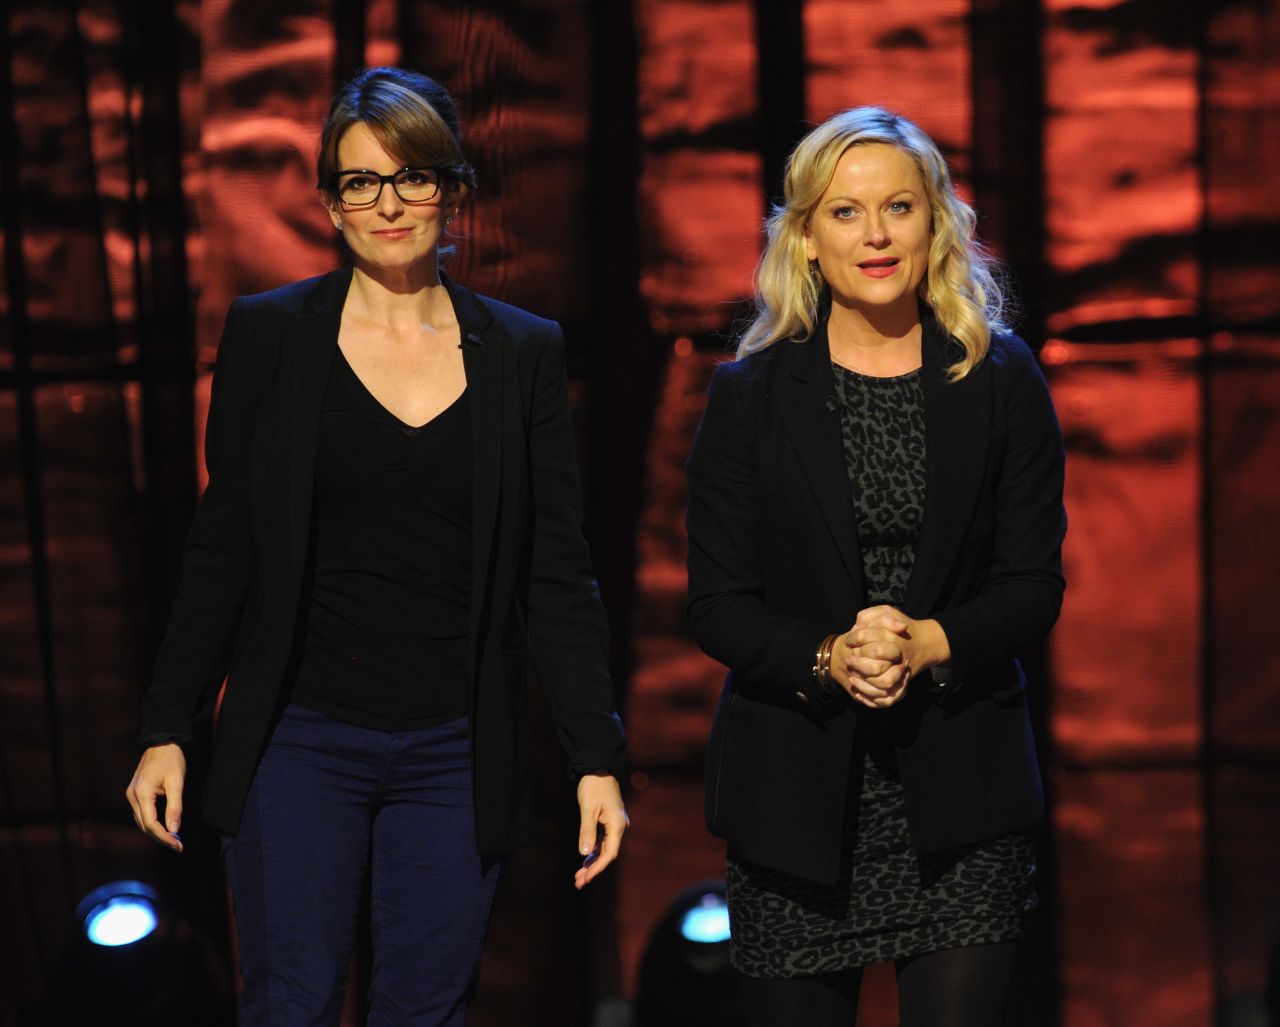 Fey and Poehler attend Comedy Central's "Night of Too Many Stars" to support autism programs in October 2012. 